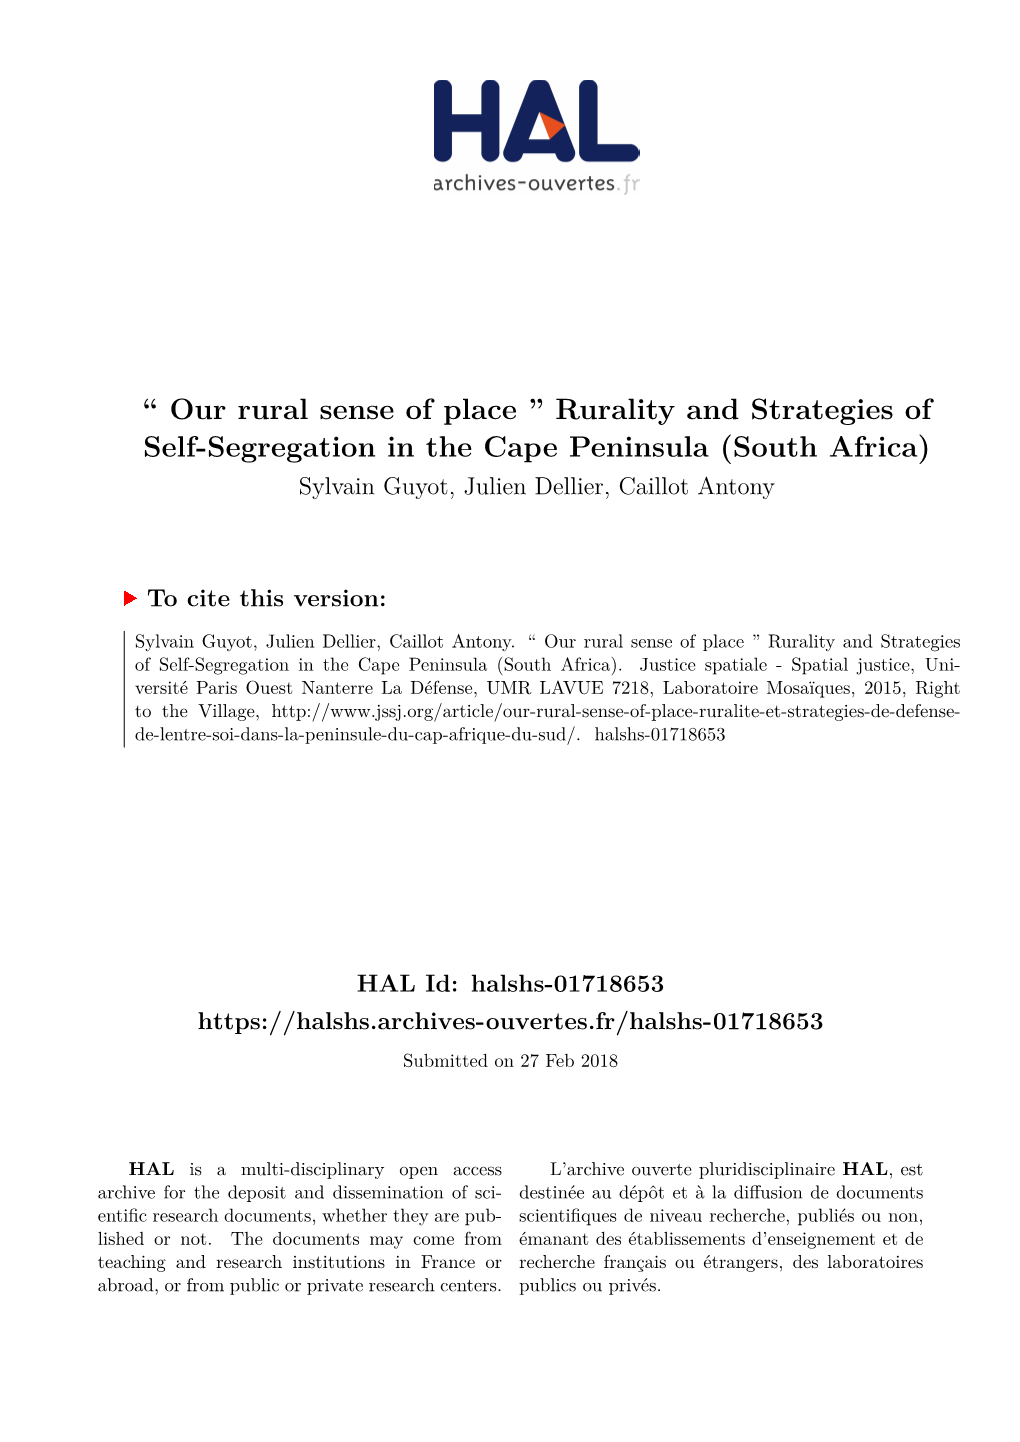 Rurality and Strategies of Self-Segregation in the Cape Peninsula (South Africa) Sylvain Guyot, Julien Dellier, Caillot Antony